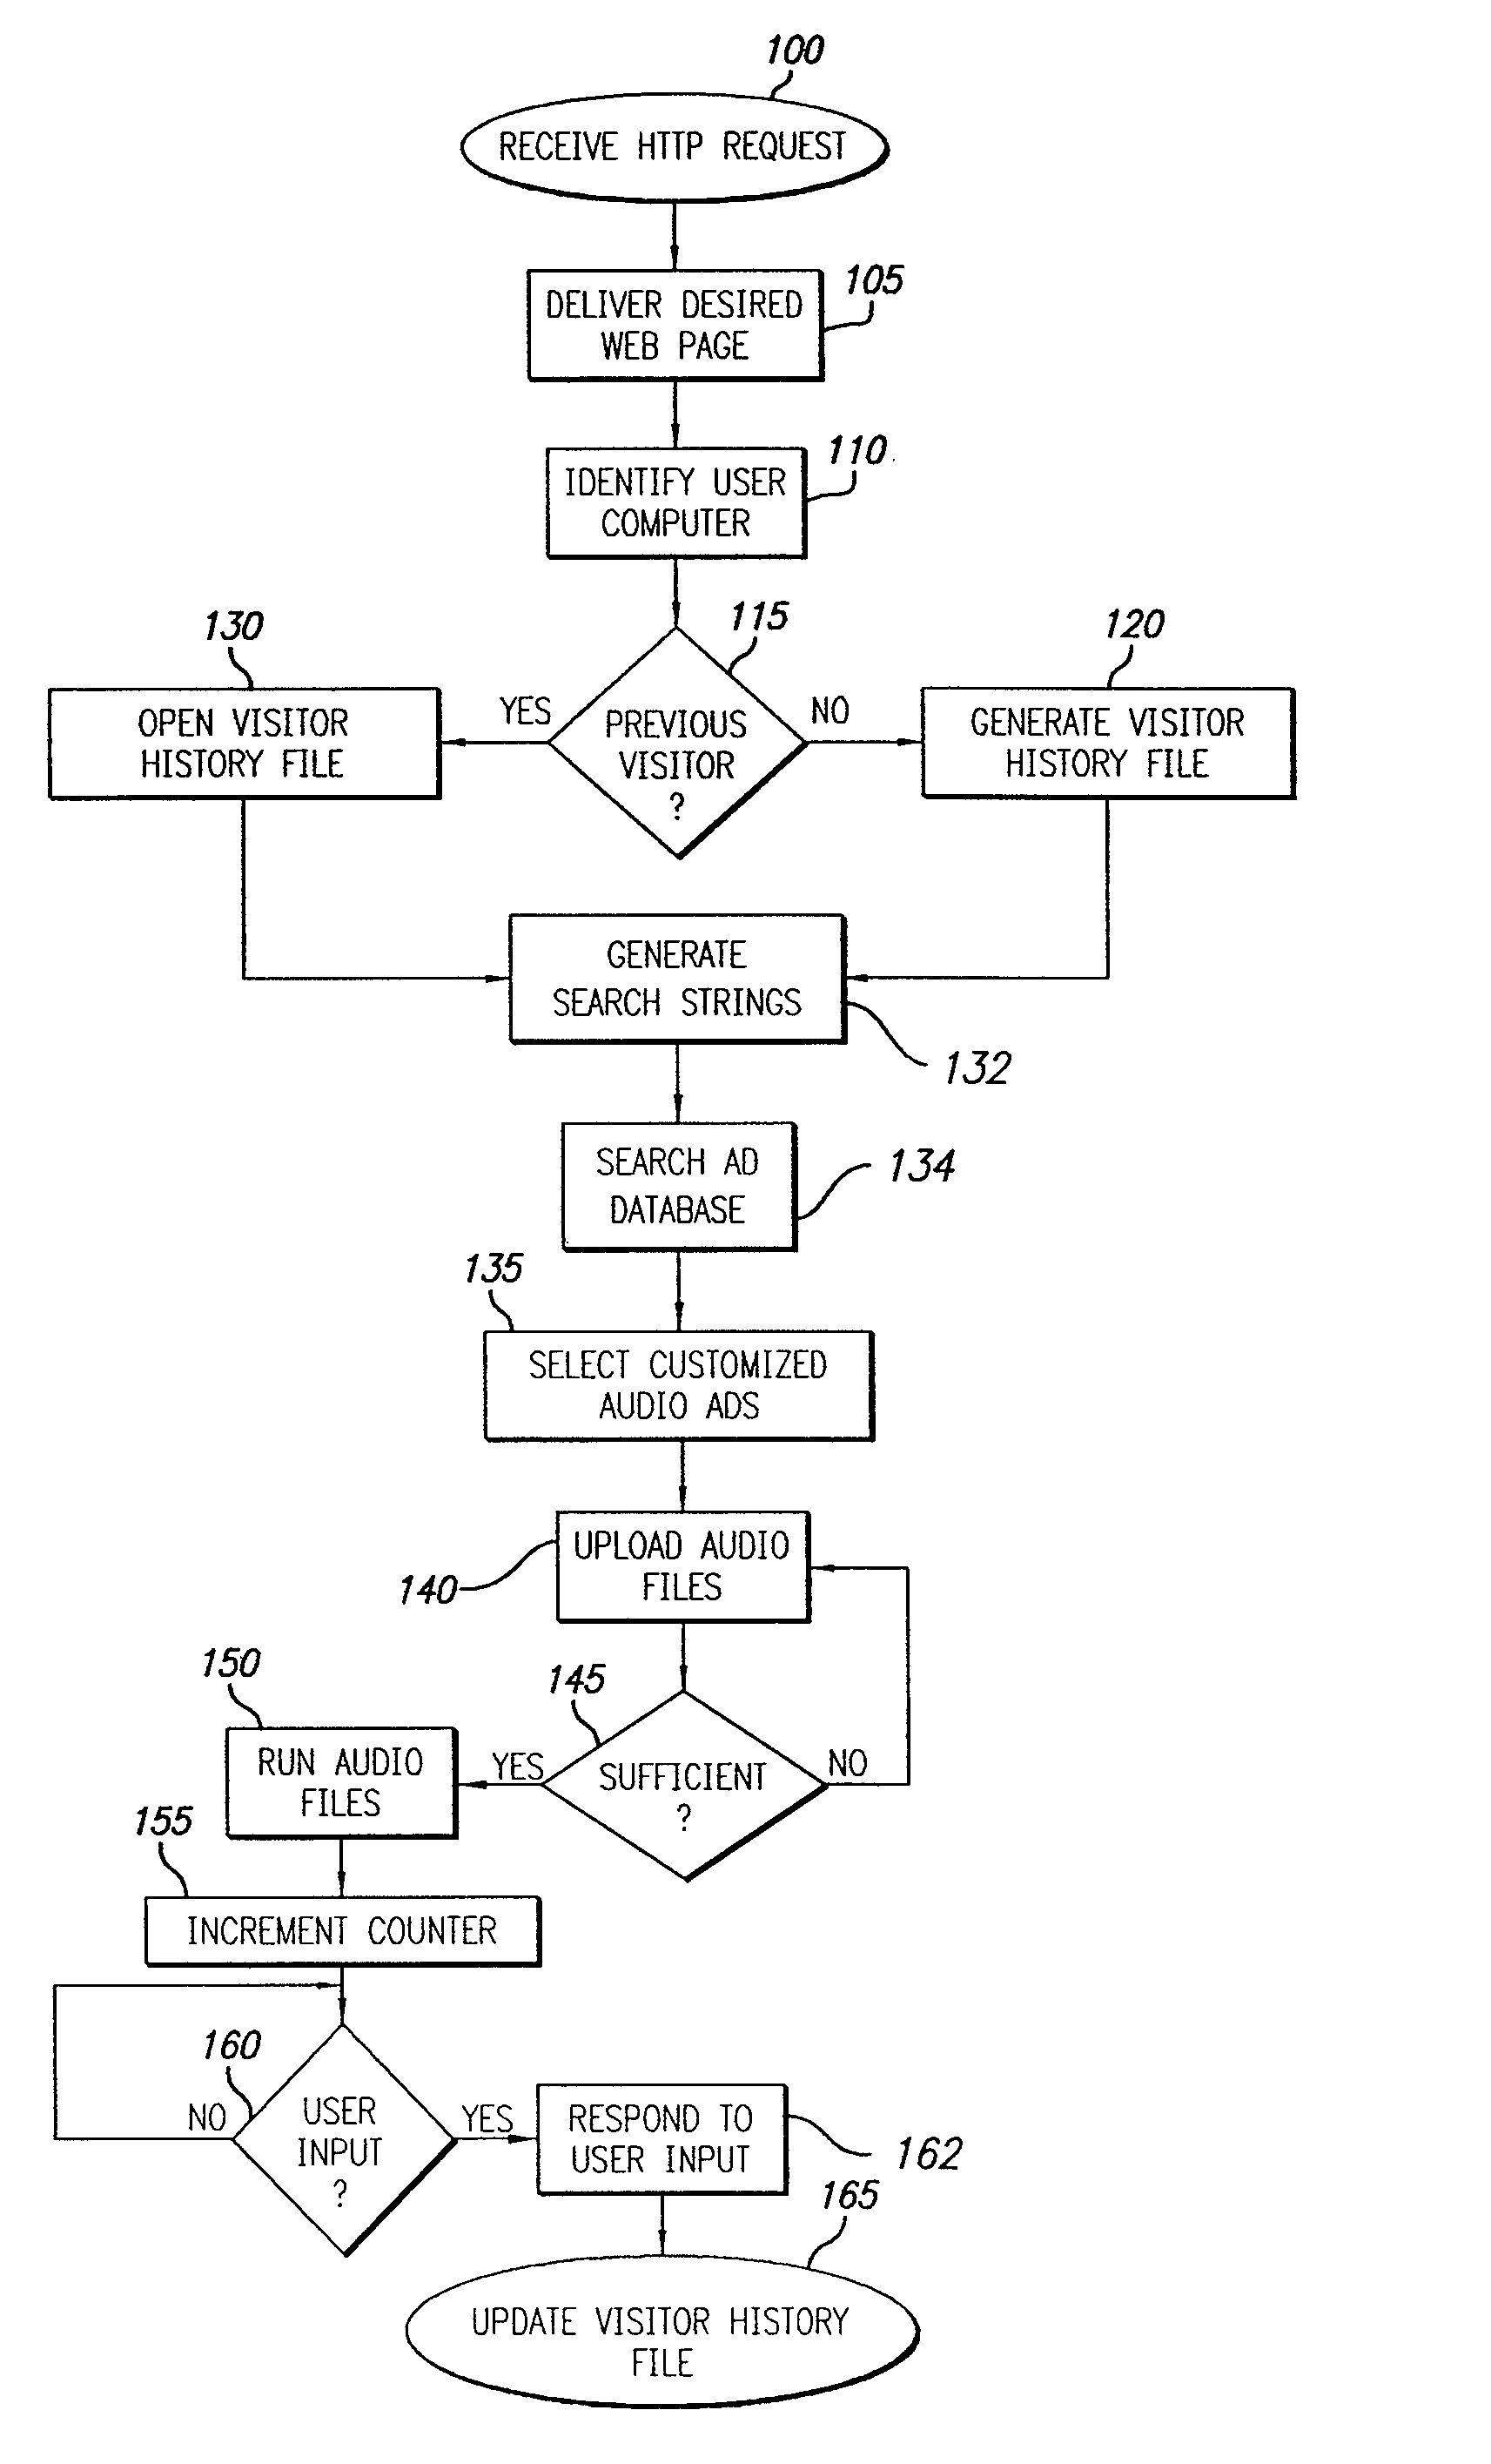 Method and apparatus for providing audio advertisements in a computer network